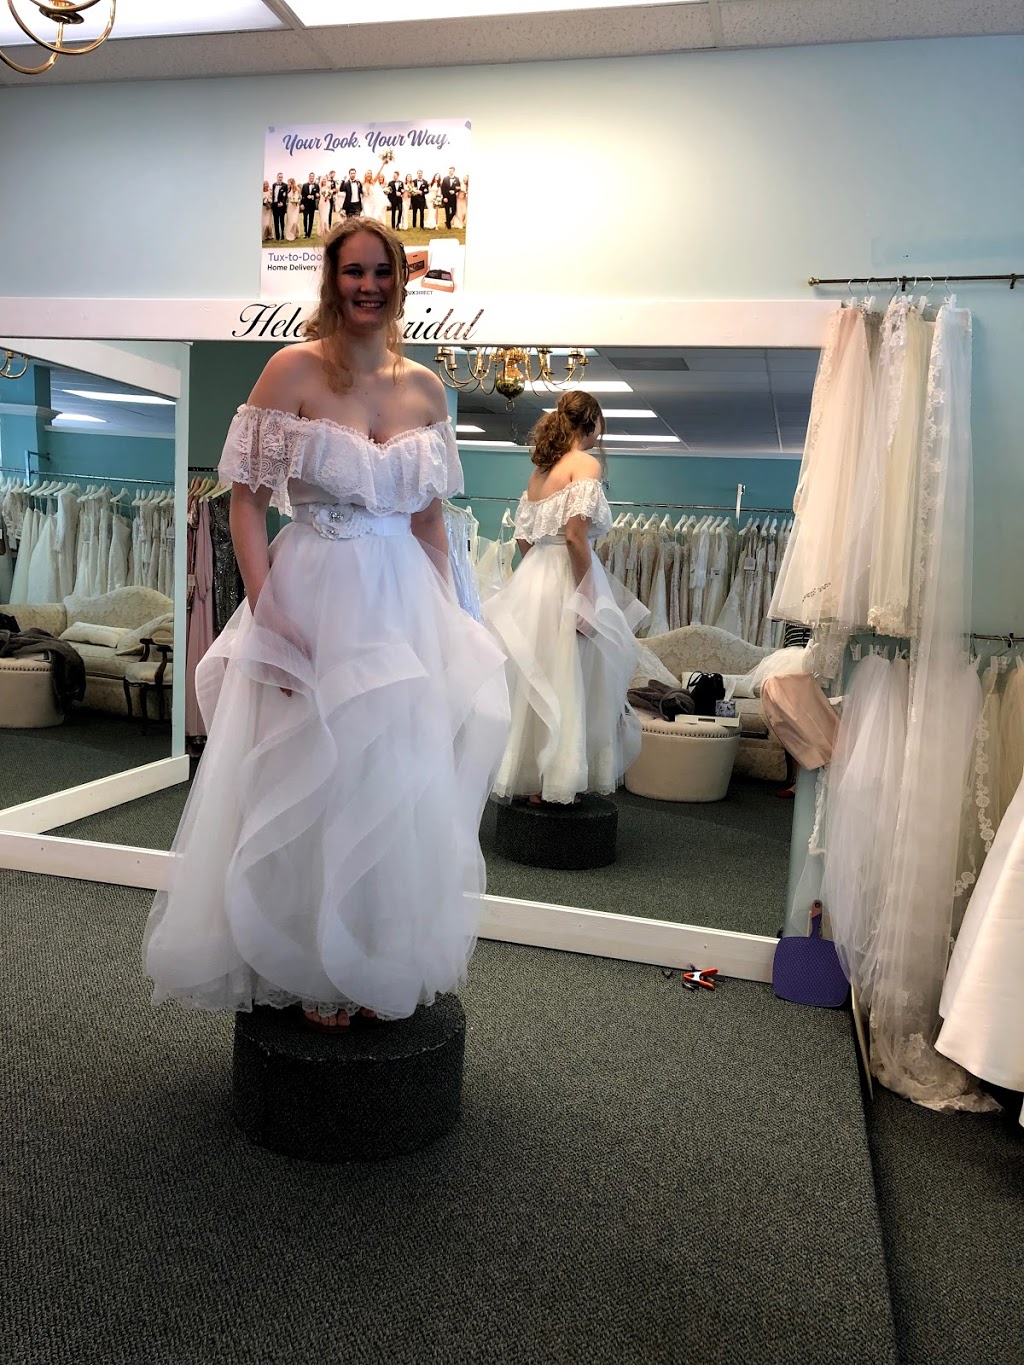 Helens Bridal, Prom and Alterations | 10410 Manchester Rd, Kirkwood, MO 63122, USA | Phone: (314) 966-6370